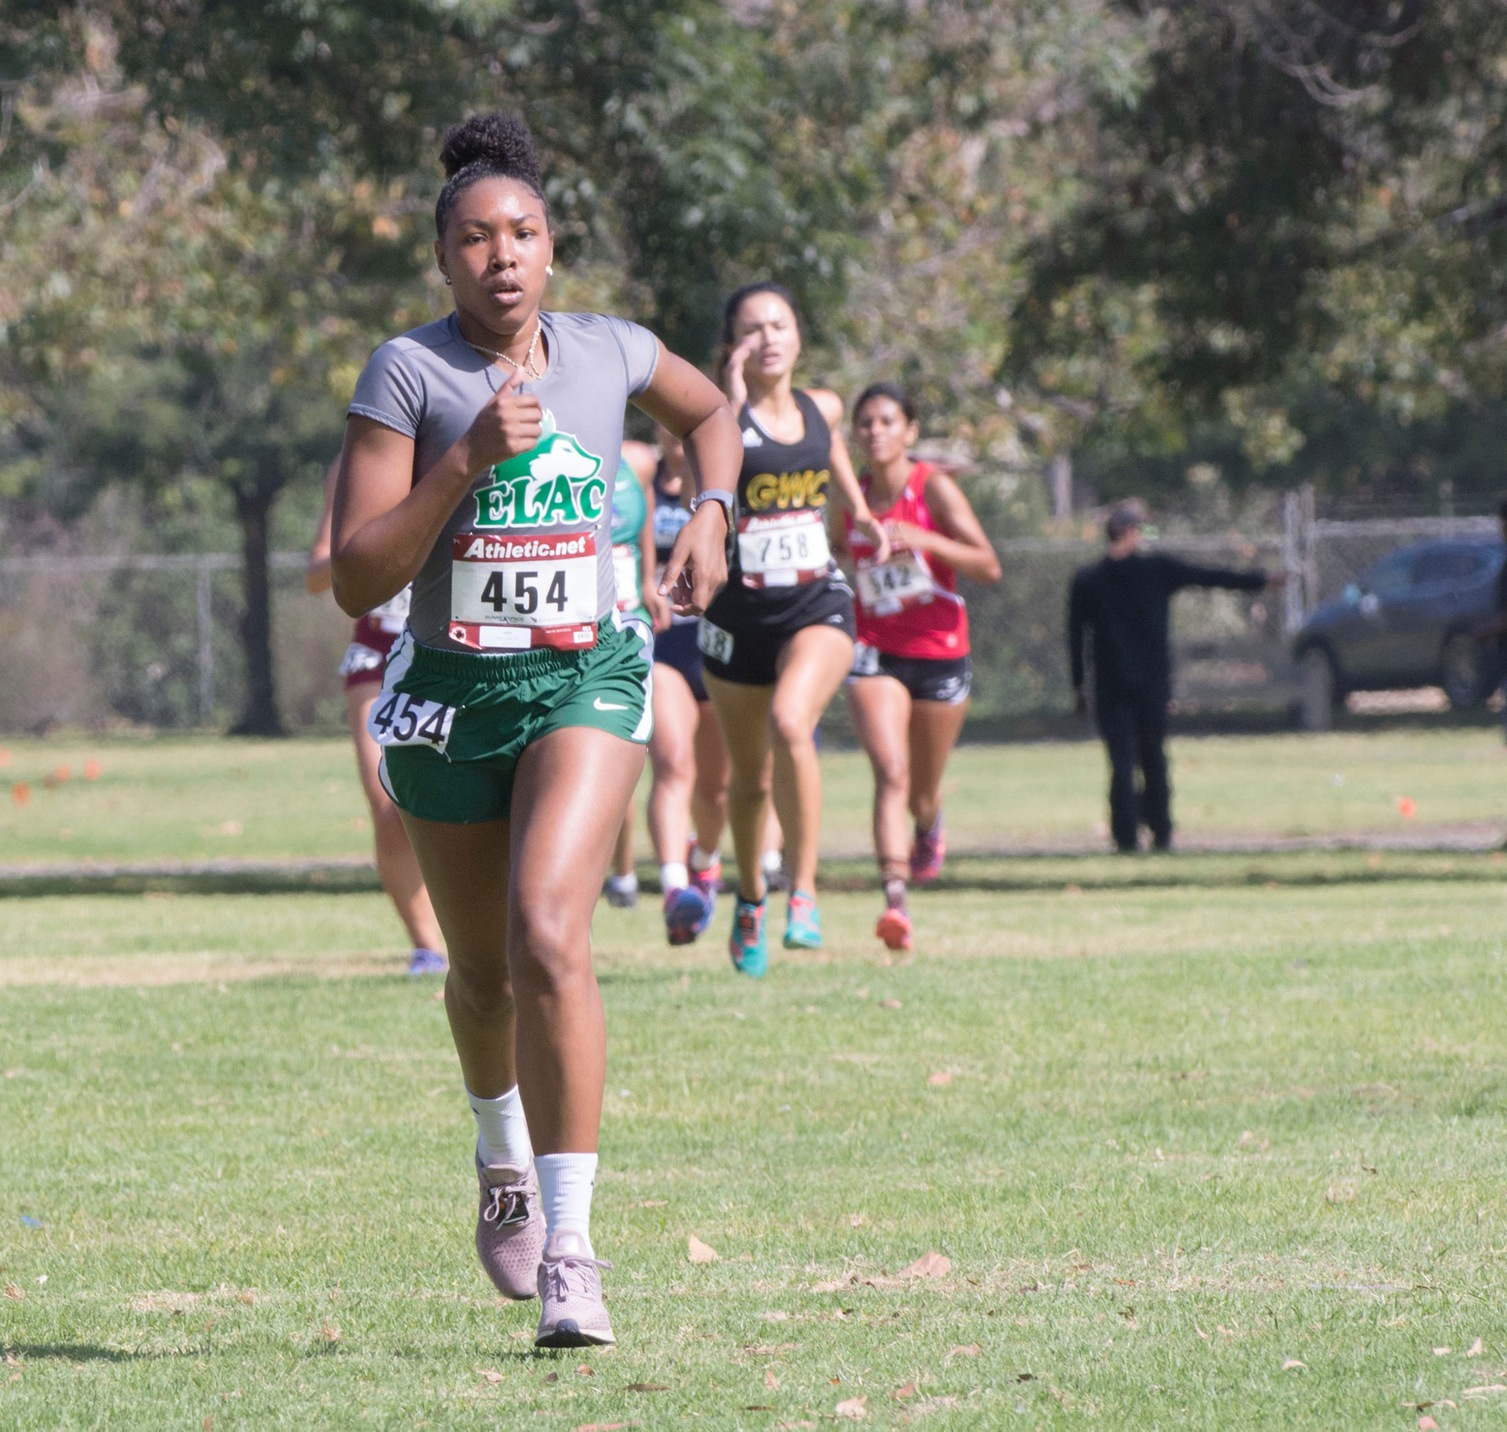 East L.A. College freshman Tahlia Adams gets a personal record at the Mt. SAC Invitational on Oct. 13. (Photo by Tadzio Garcia)